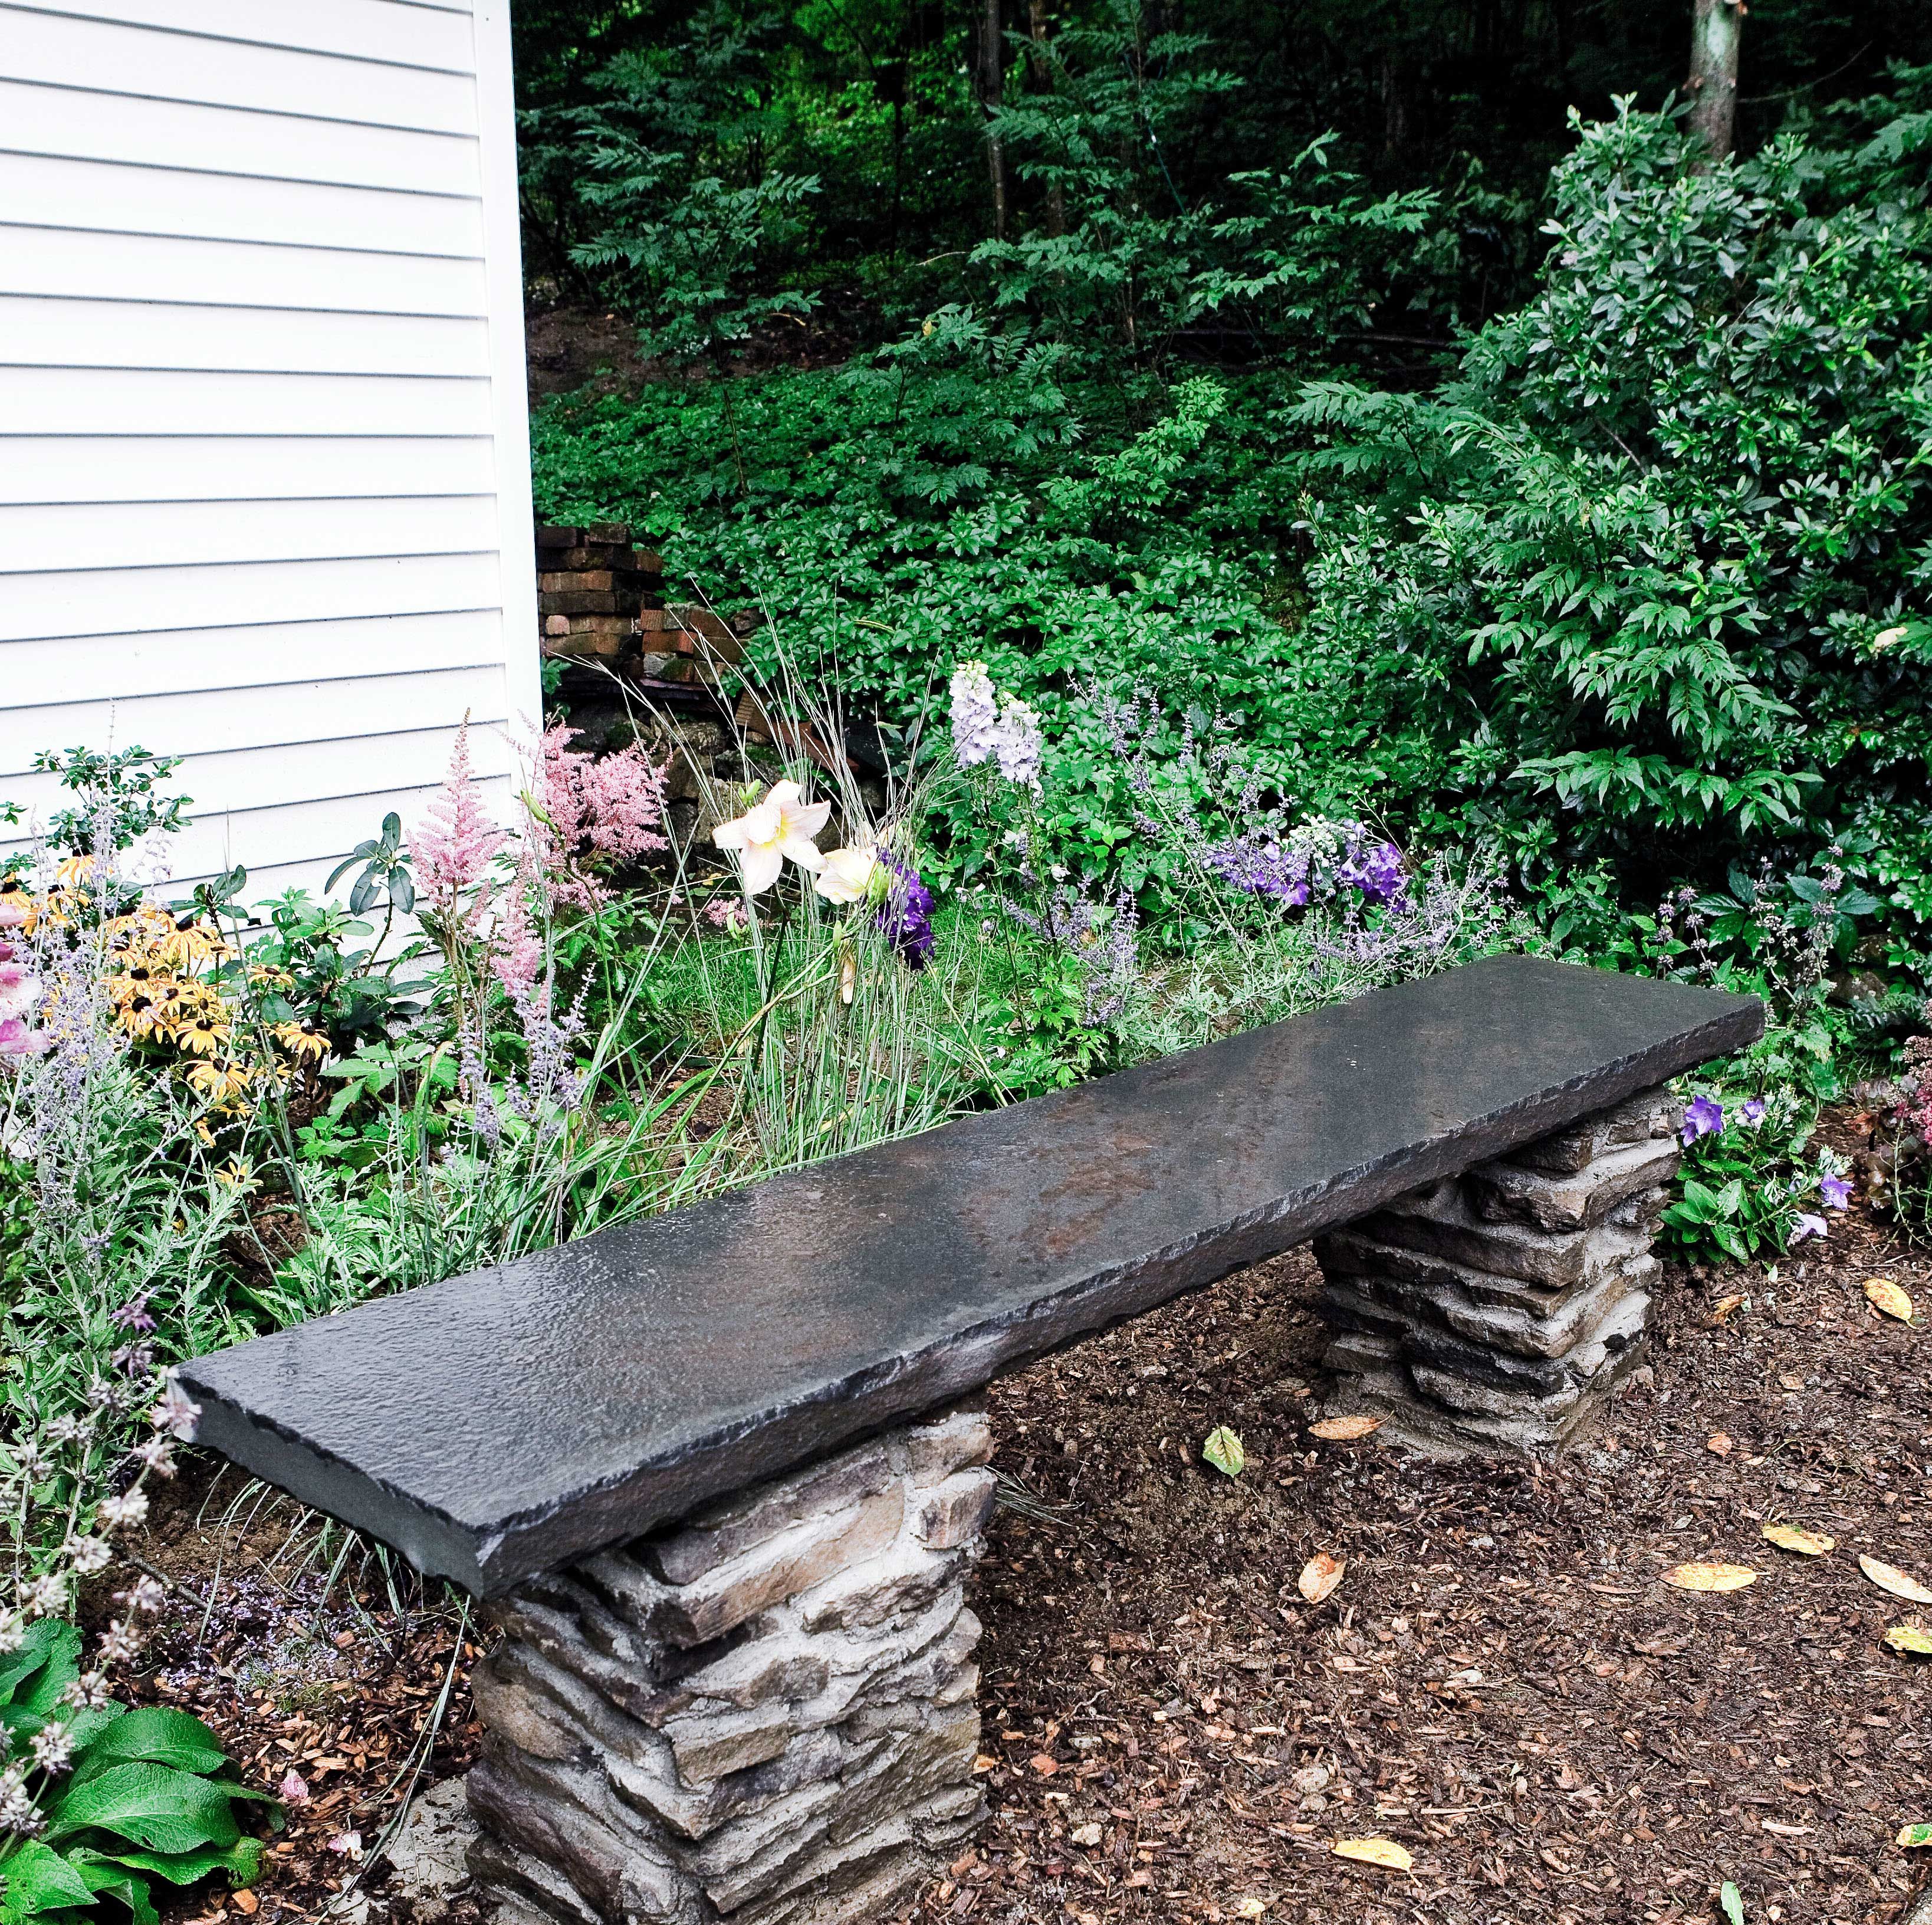 Learn To Work With Stone By Building This Classic Garden Bench